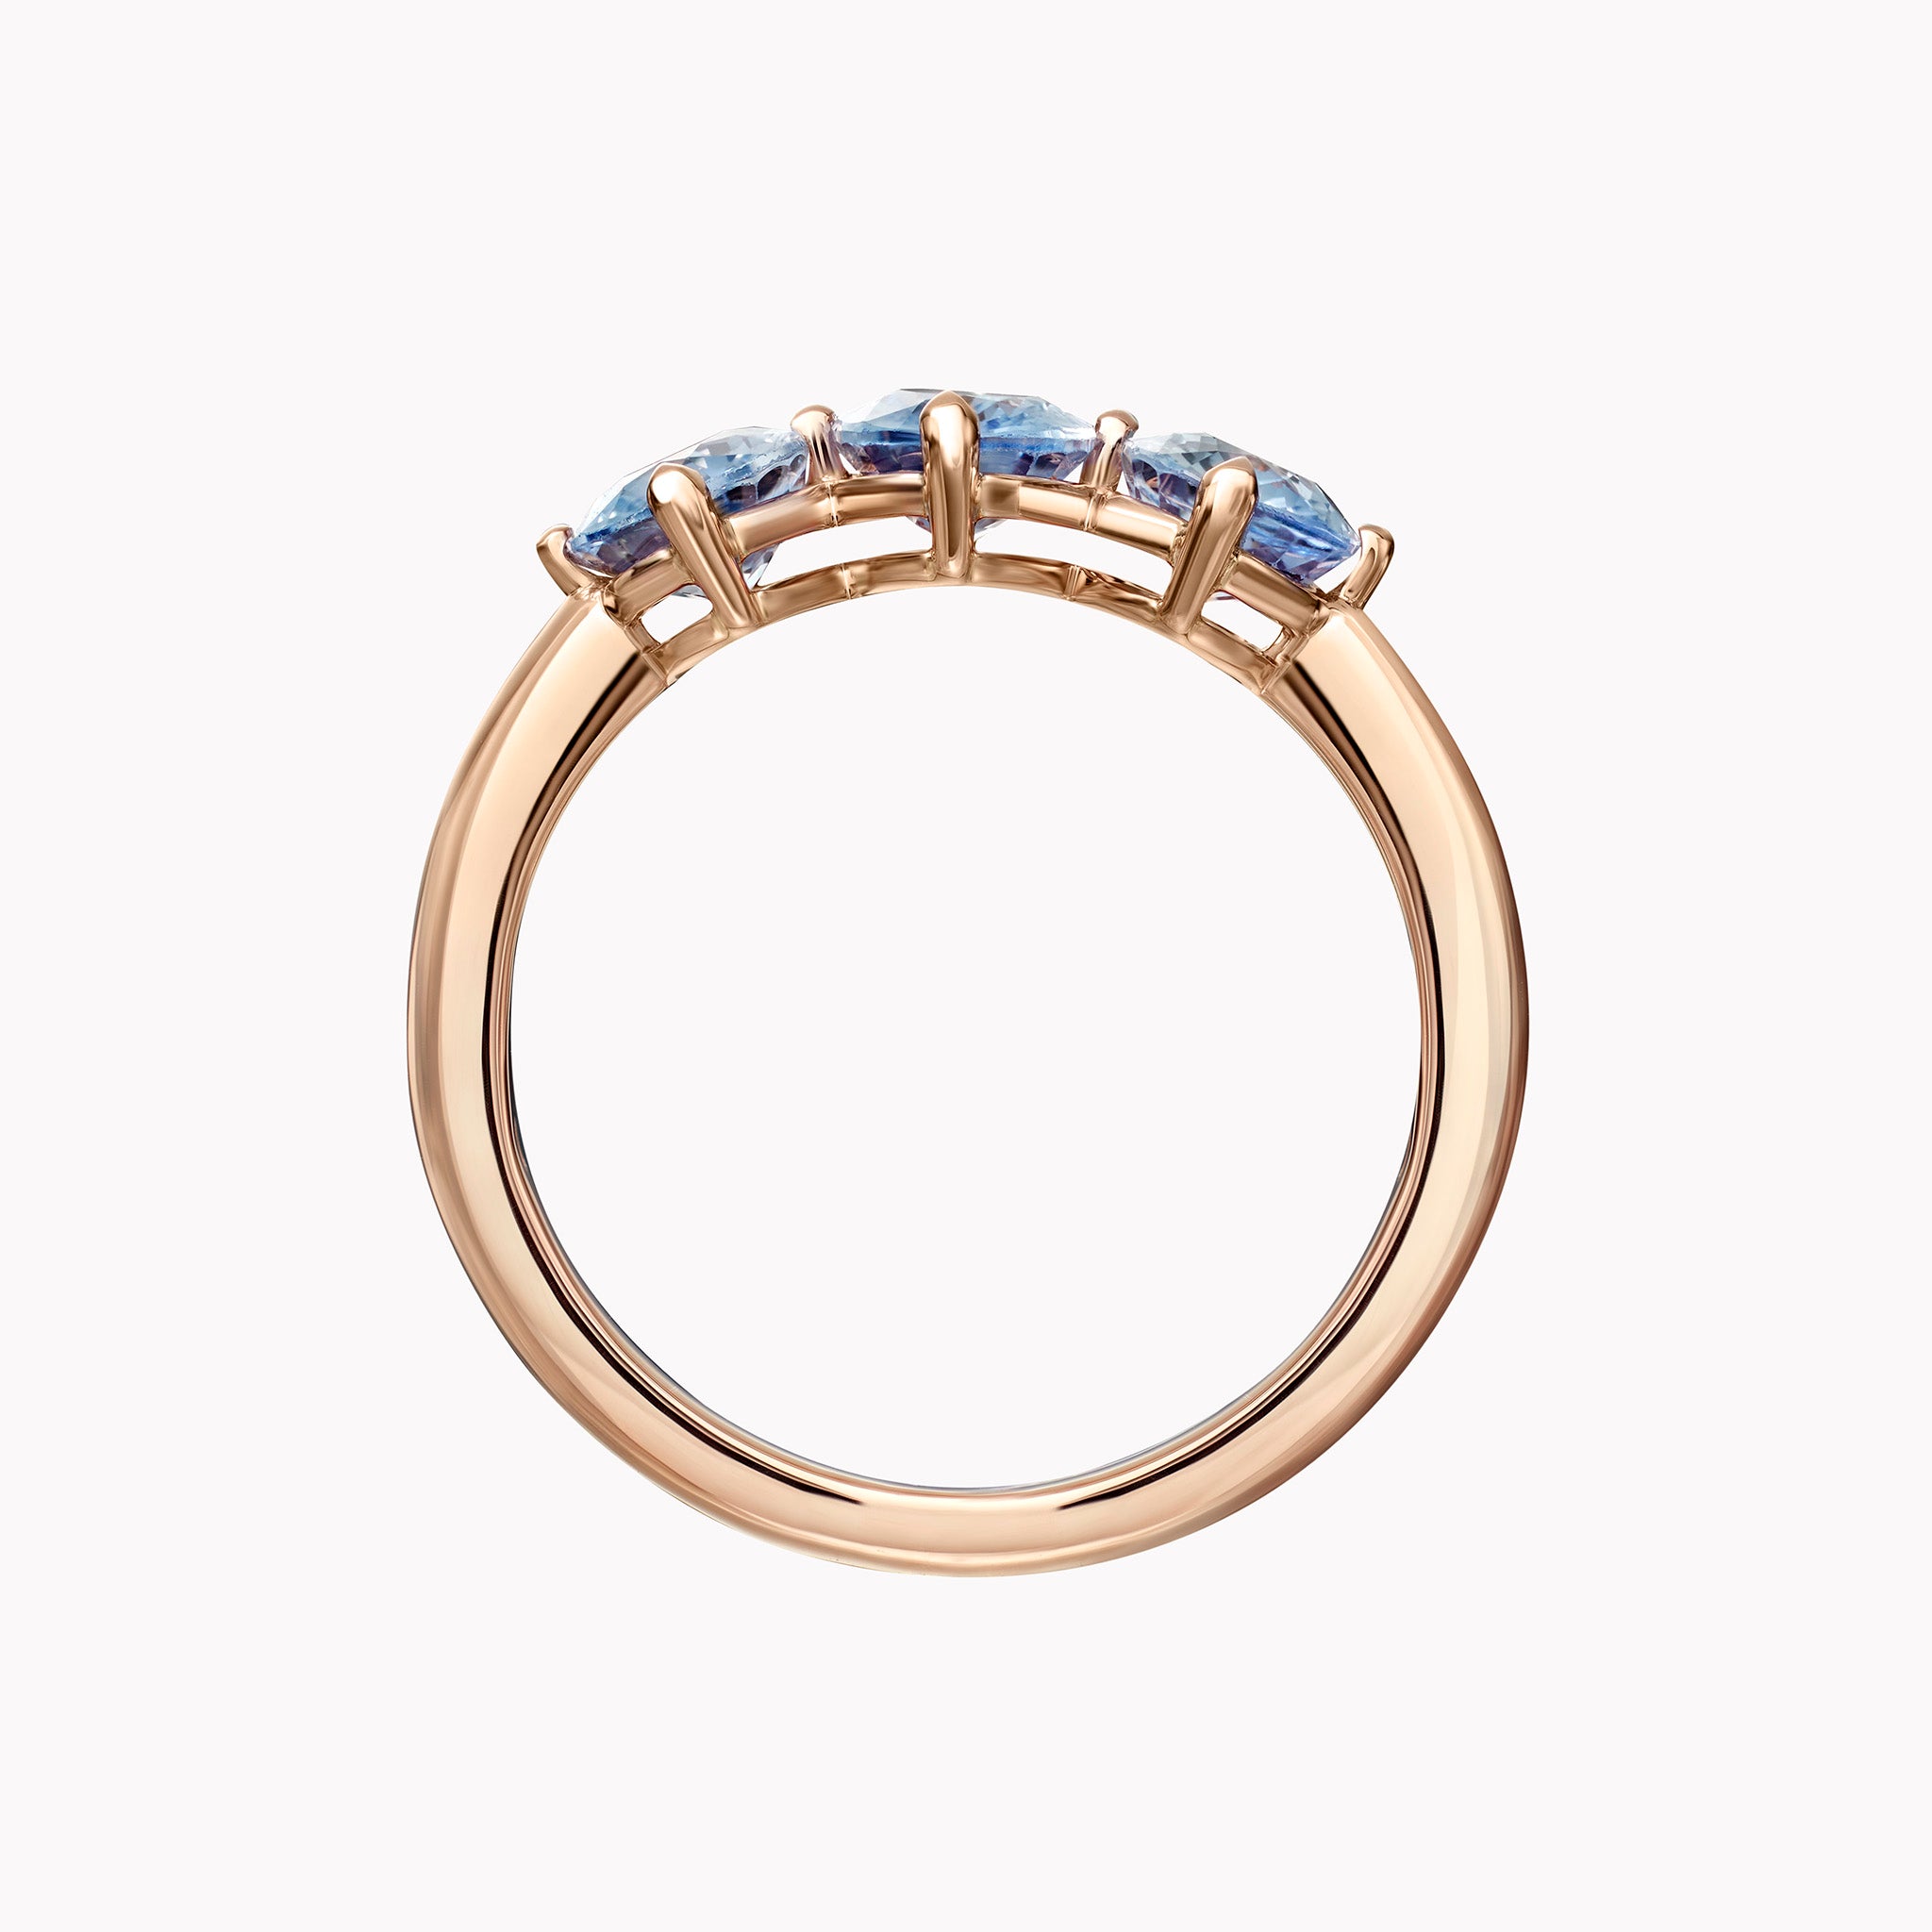 The Lacie Ring